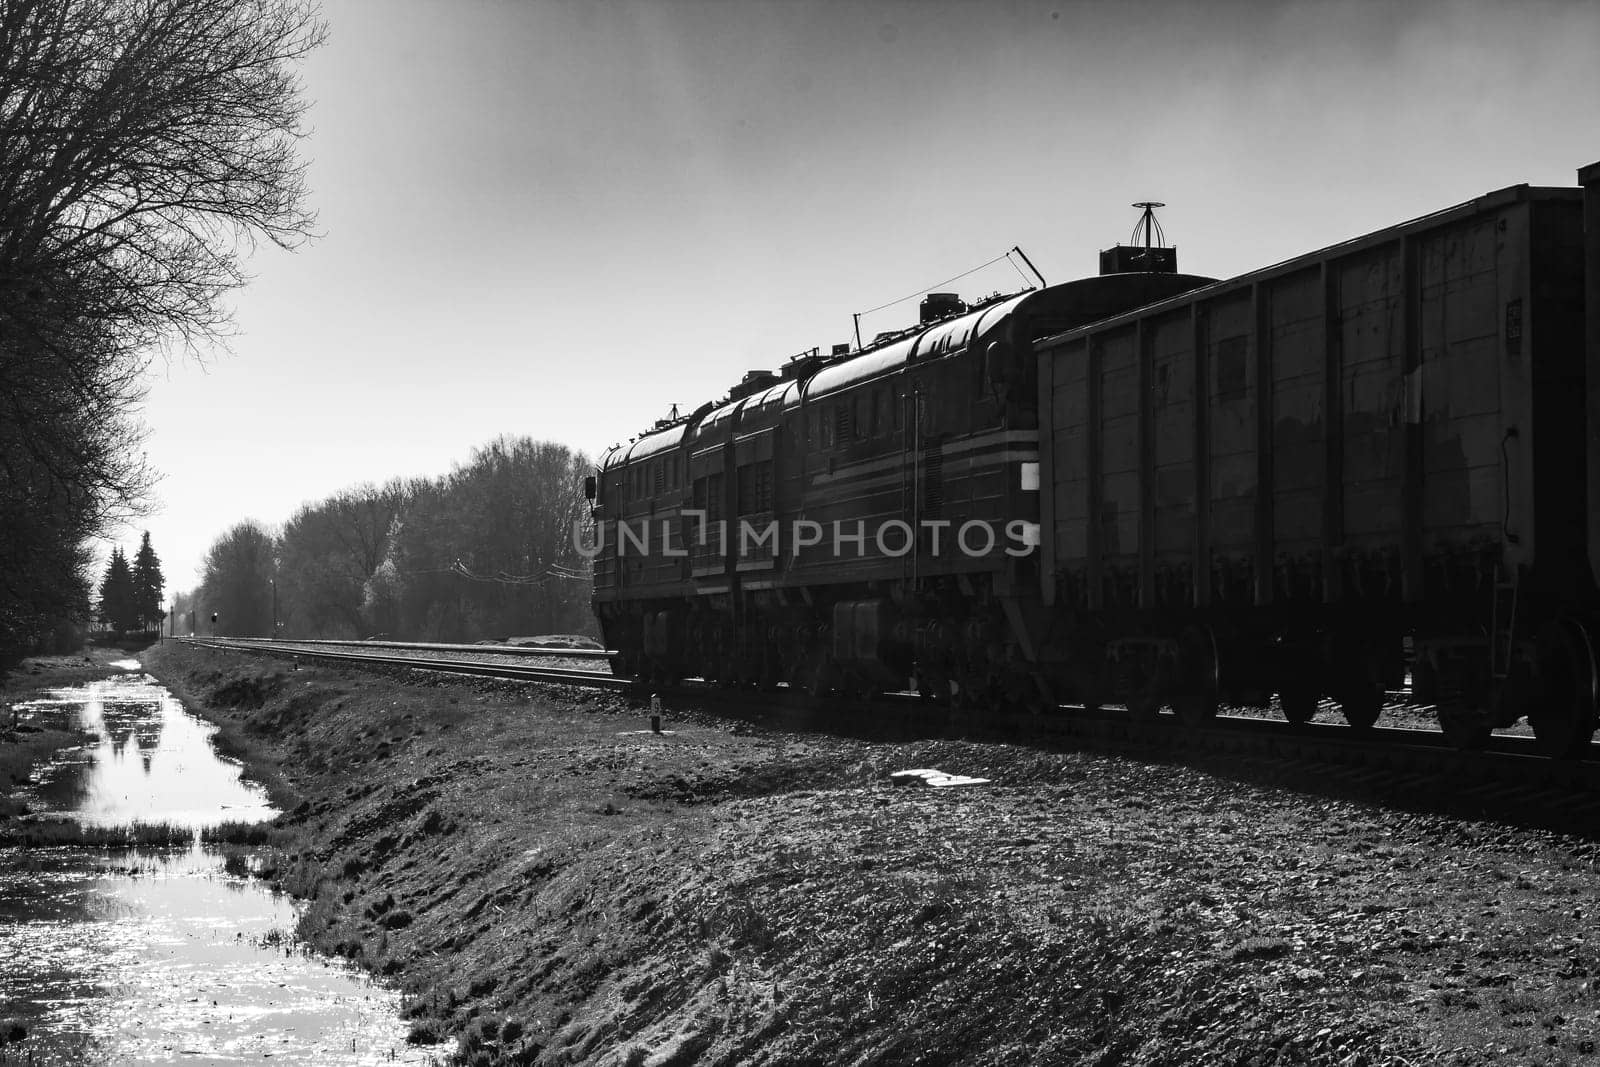 The train car rides on rails, black and white photography